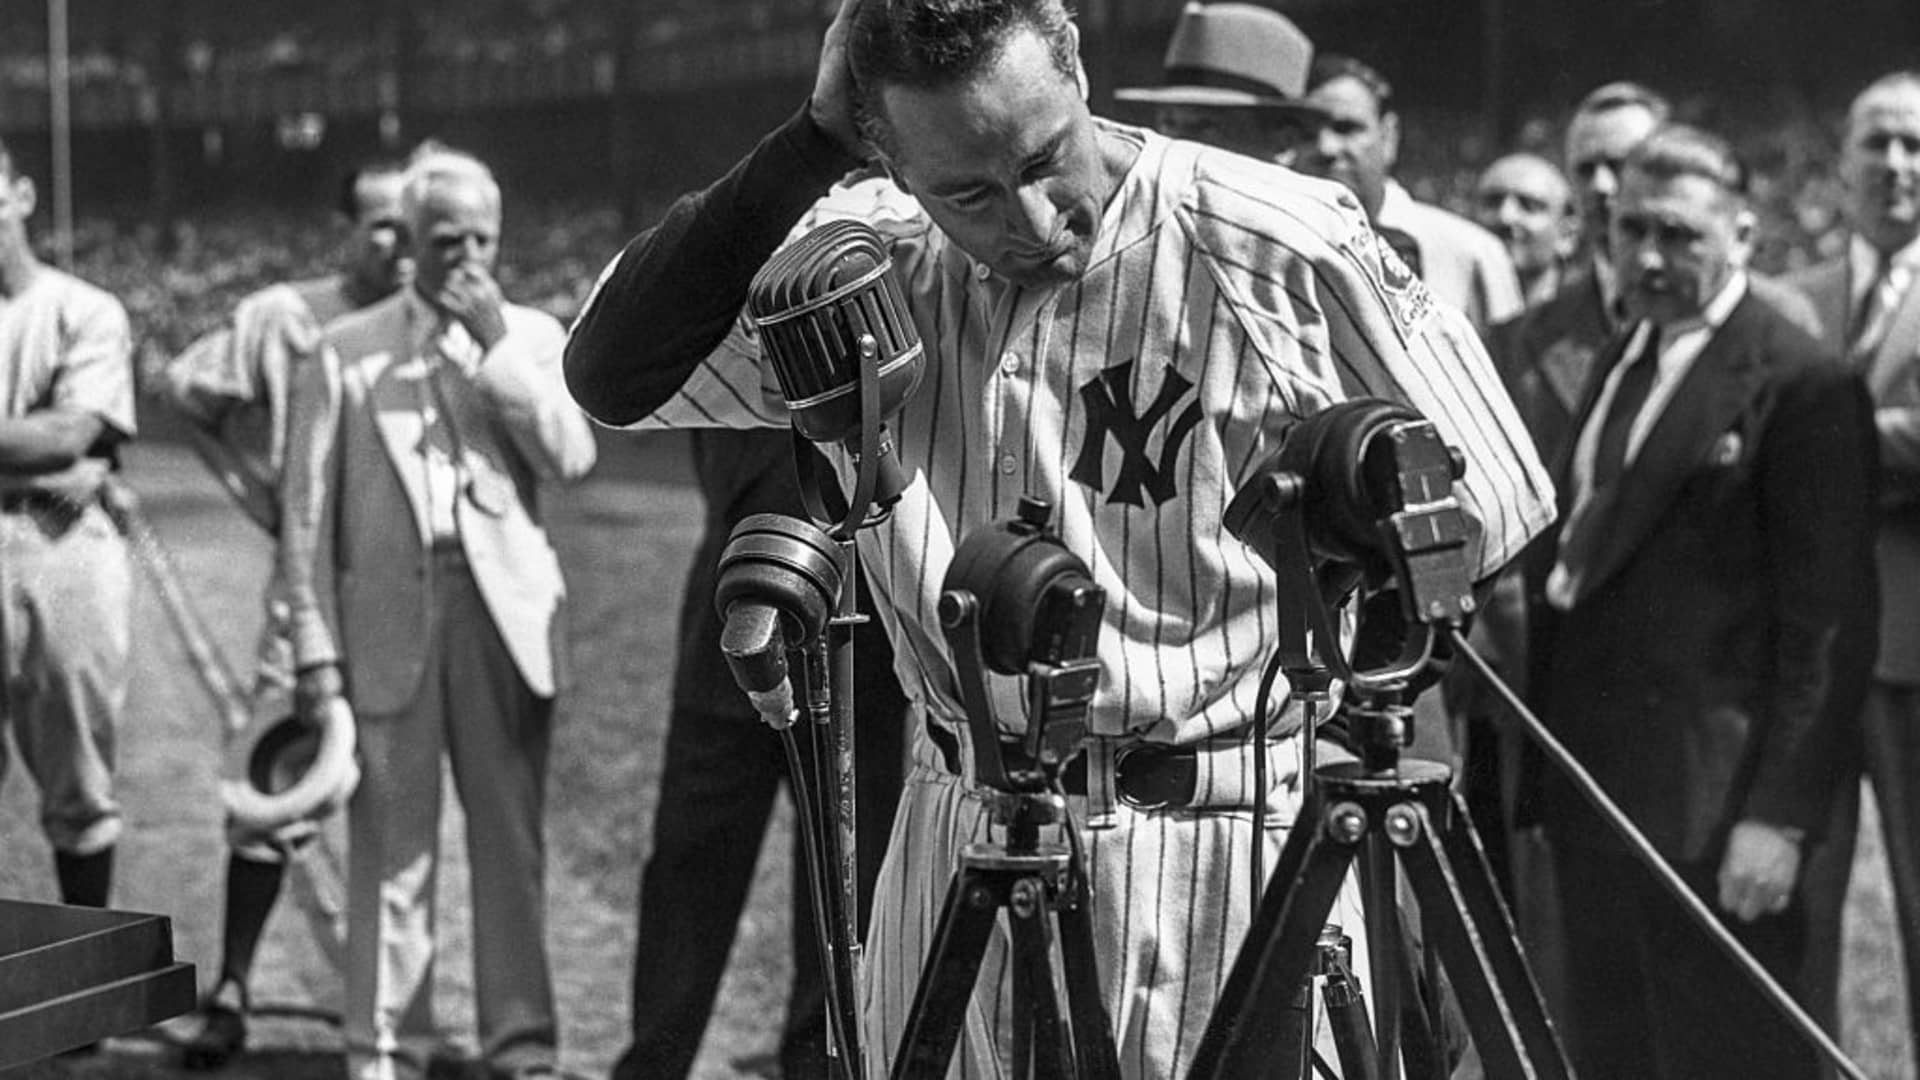 Lou Gehrig #4 of the New York Yankees is shown before the mic delivering his farewell speech on Lou Gehrig Day on July 4, 1939 at Yankee Stadium in the Bronx, New York.